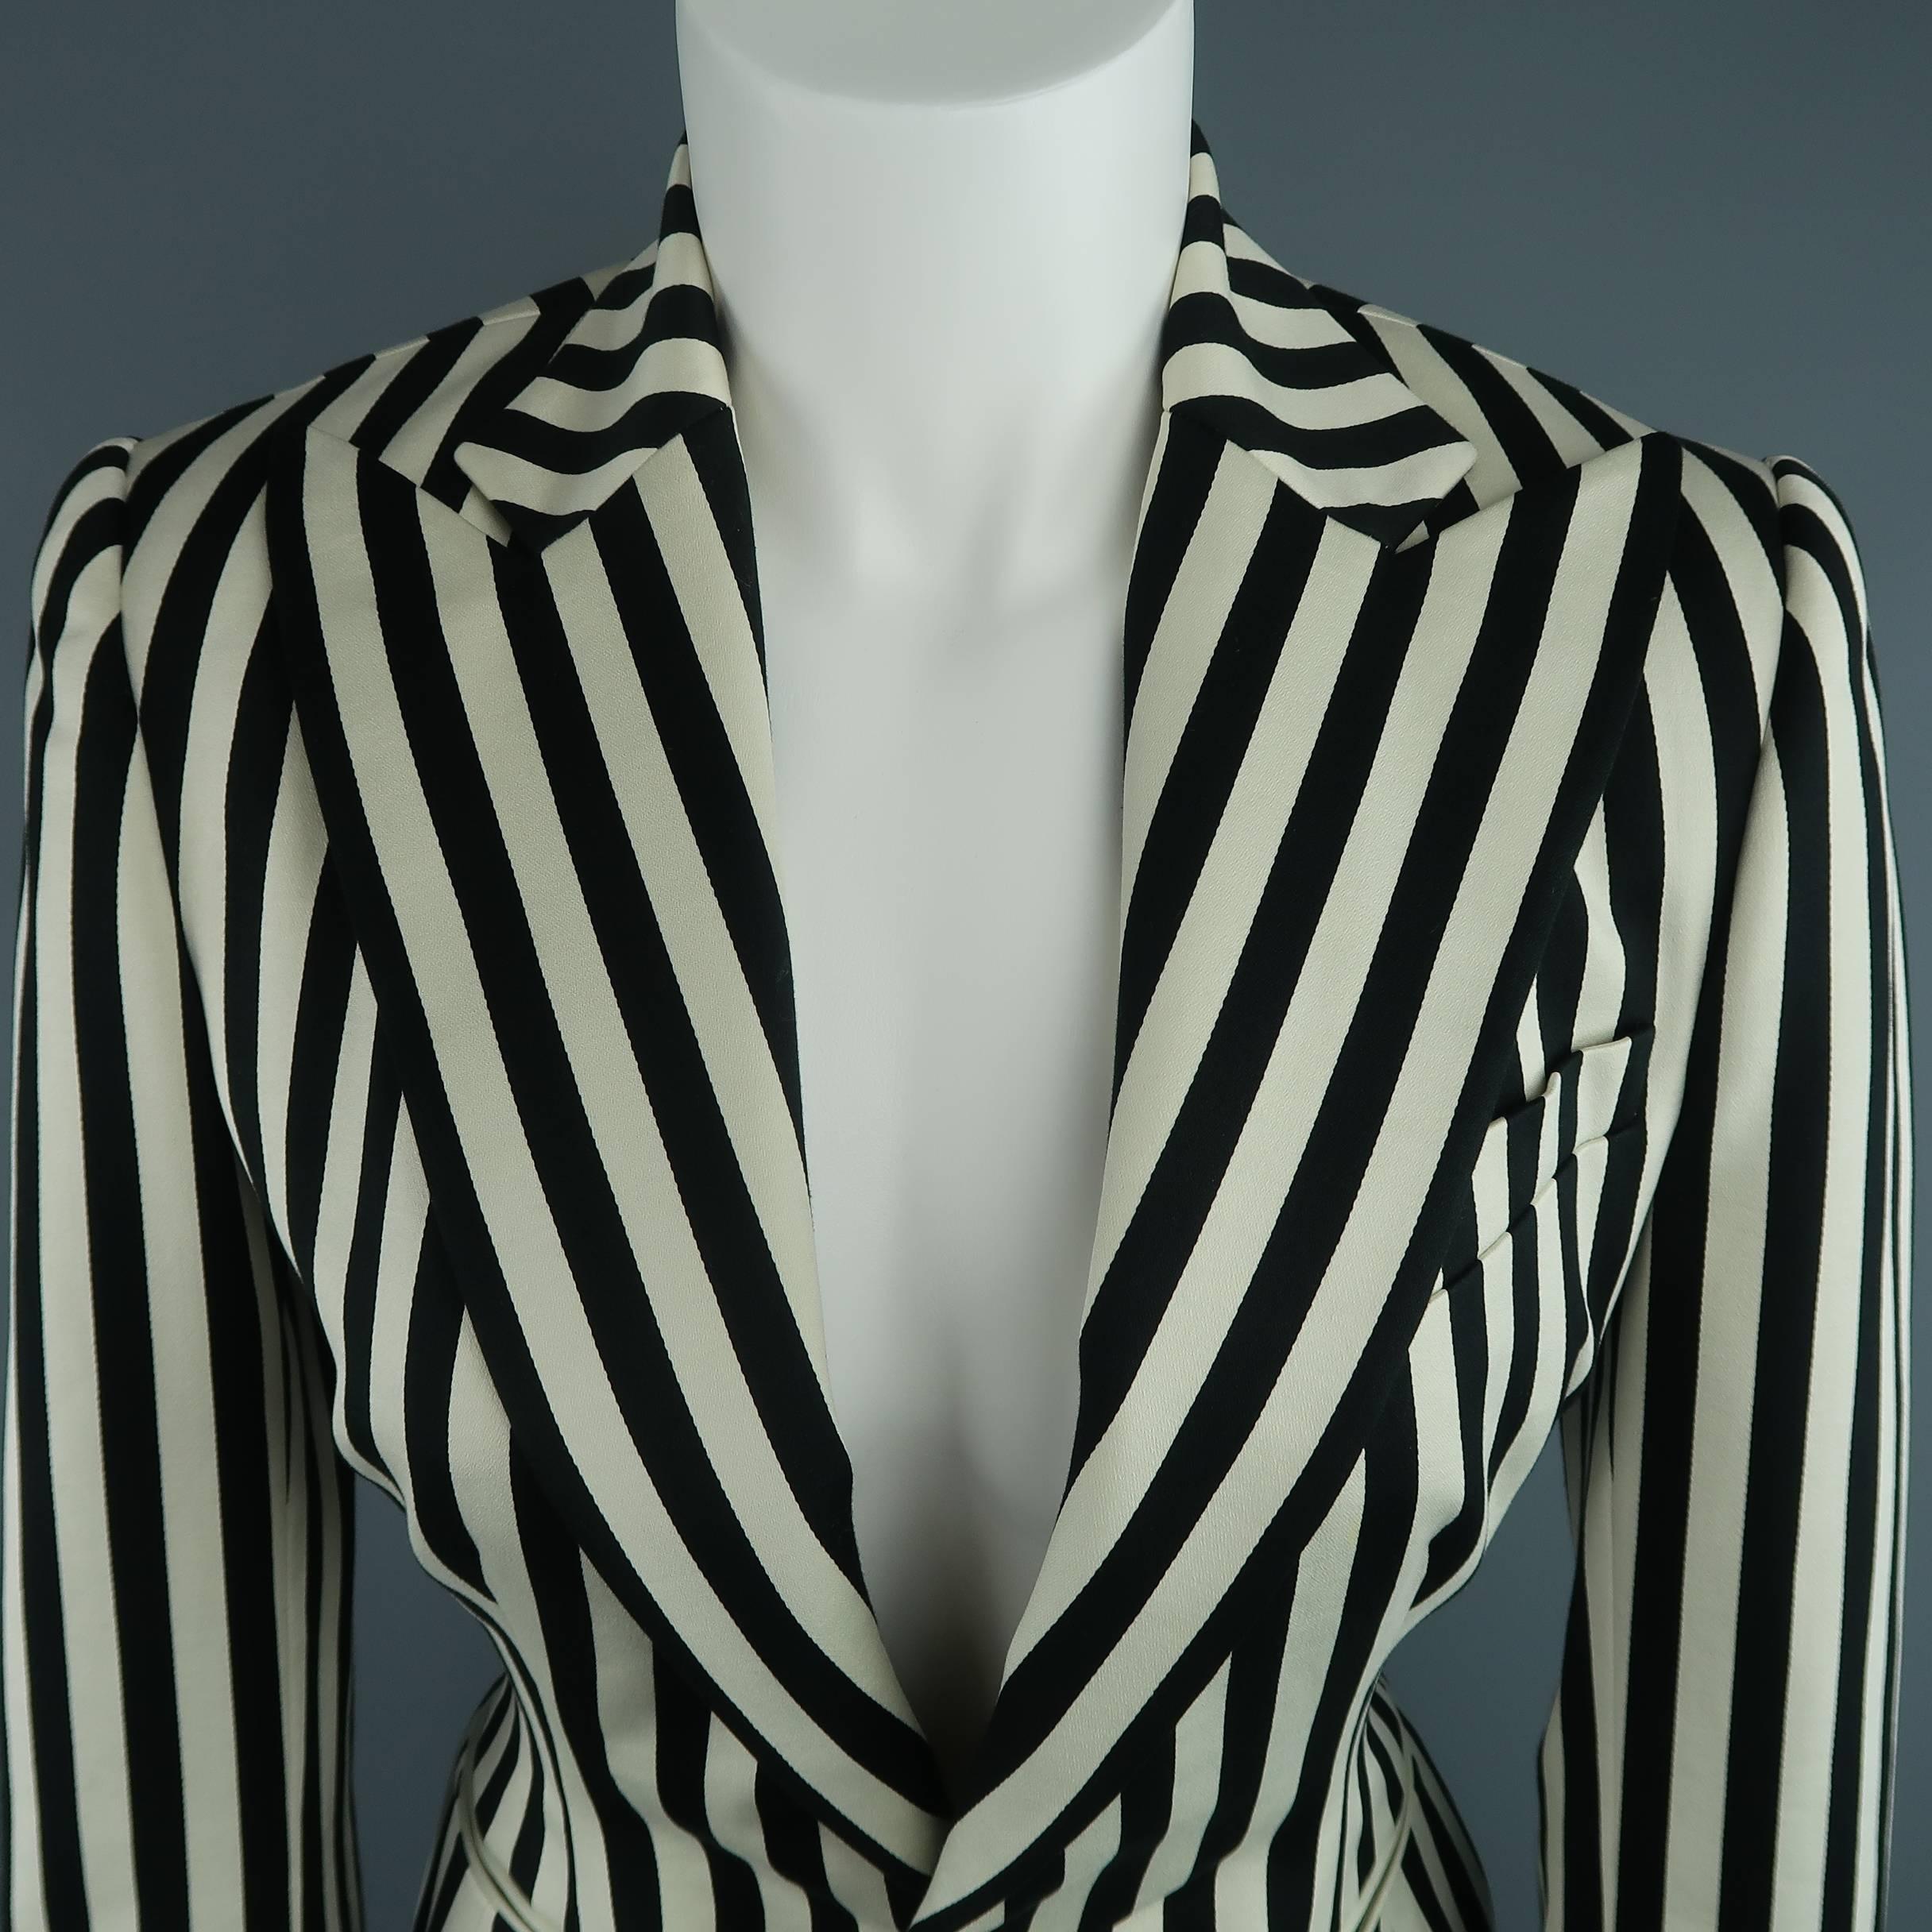 Ralph Lauren Collection cropped sport coat comes in cream and black striped cotton and features a wide peak lapel, strong shoulder, single button front, and round silhouette hip. Made in USA.
 
Excellent Pre-Owned Condition.
Marked: 8
